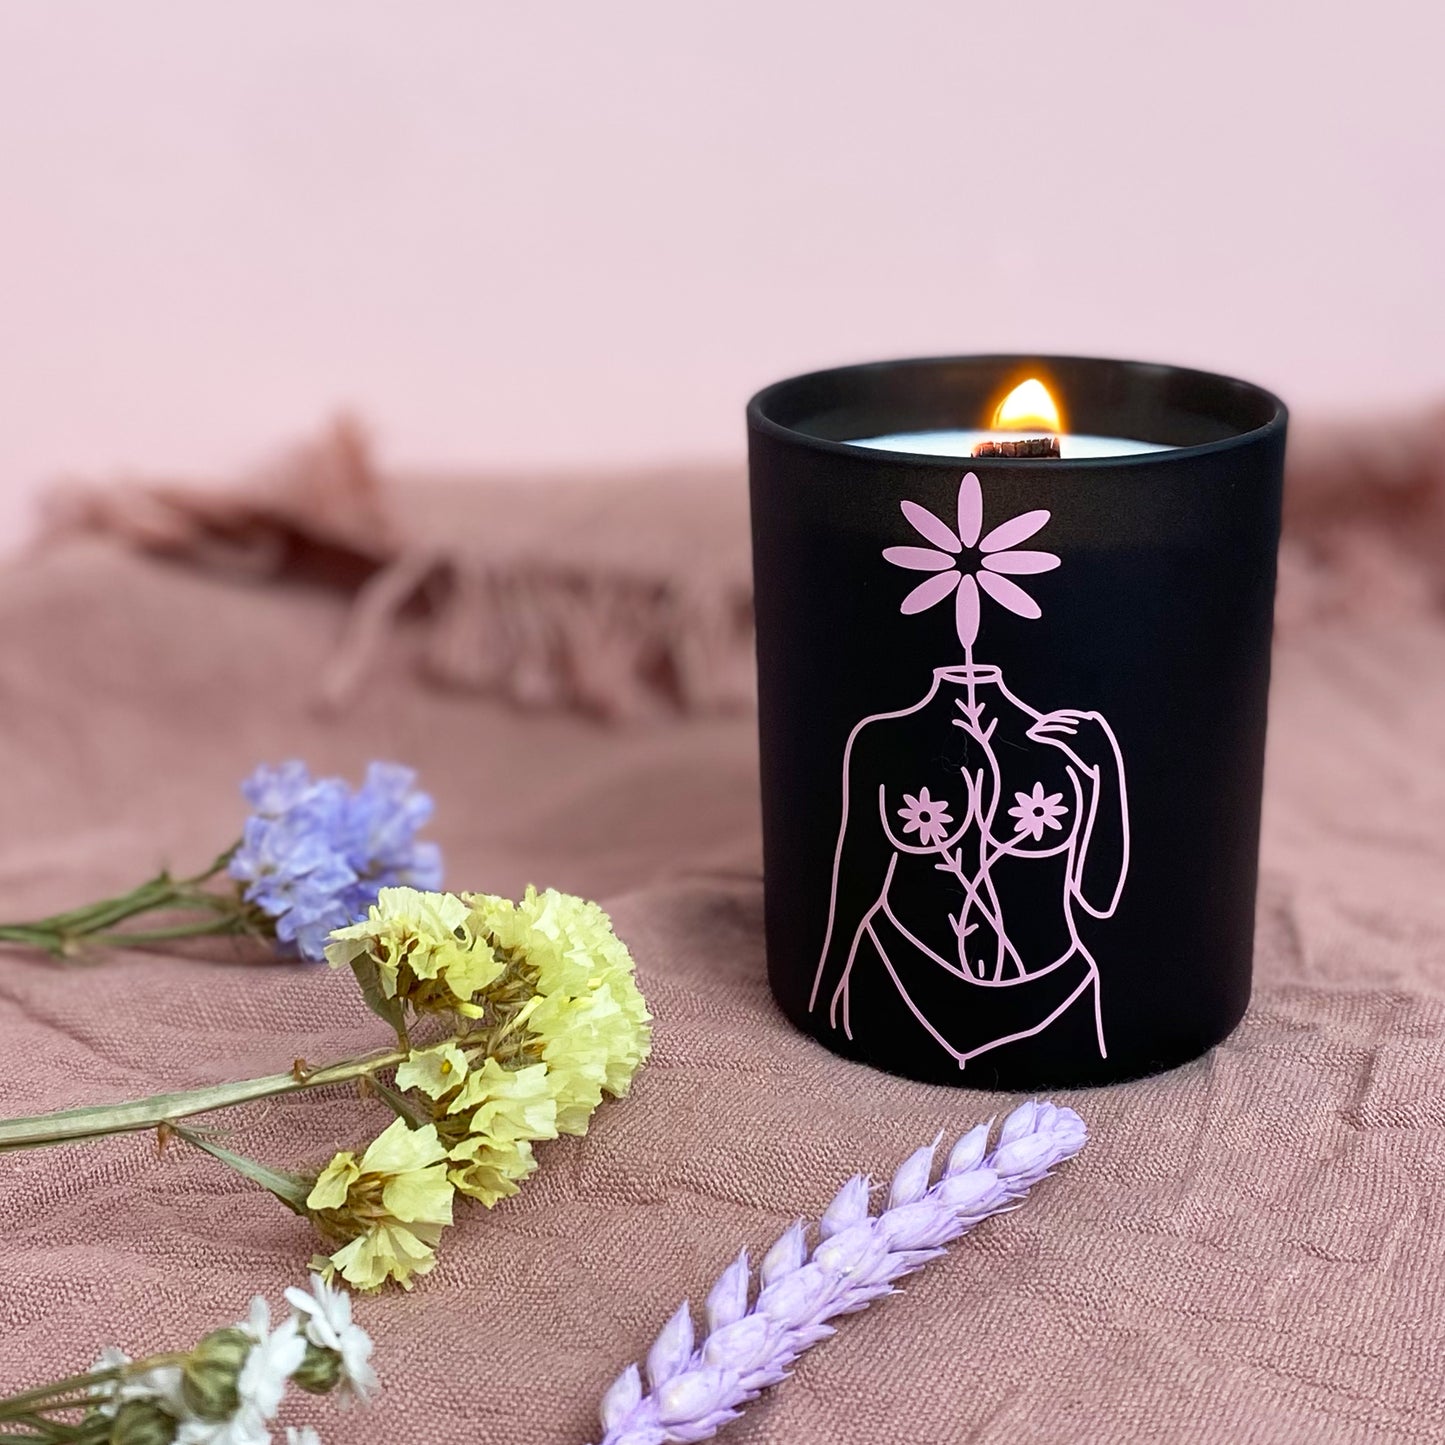 She is Beauty, Scented Soy Wax Candle